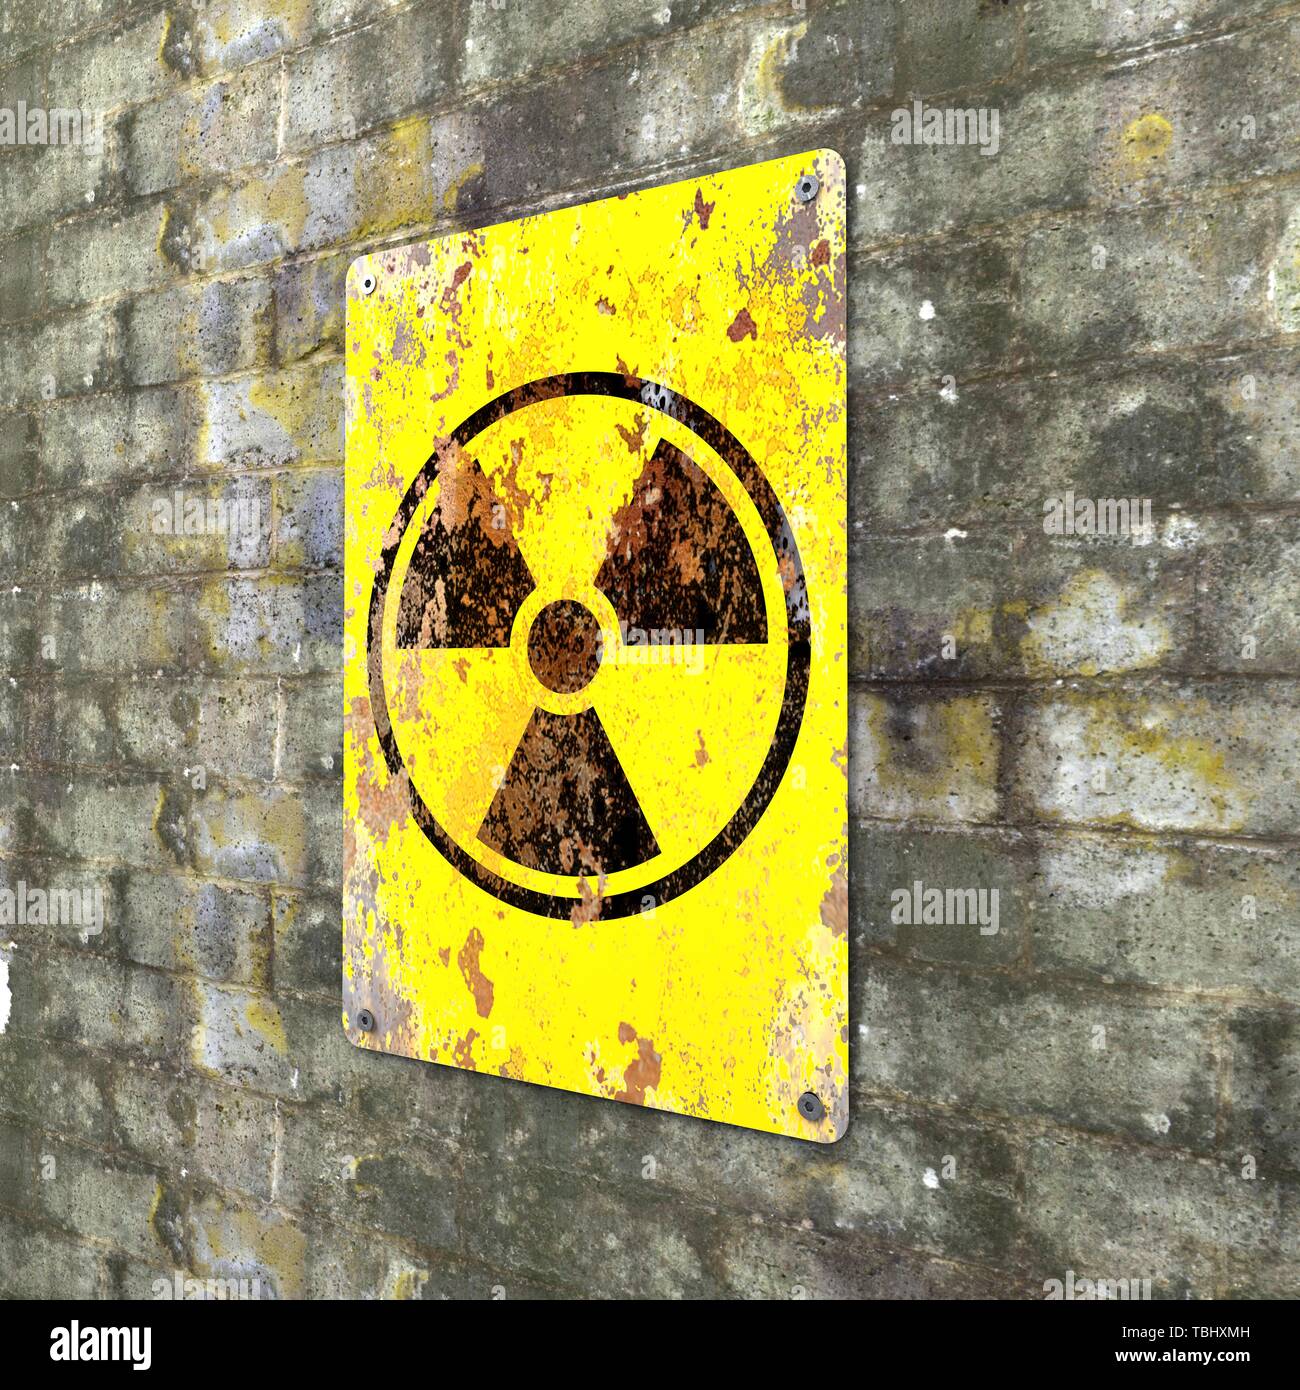 Nuclear site, sign hanging on a brick wall. Indication of the presence of a radioactive area, 3d render. Nuclear weapons. Dangerous site Stock Photo